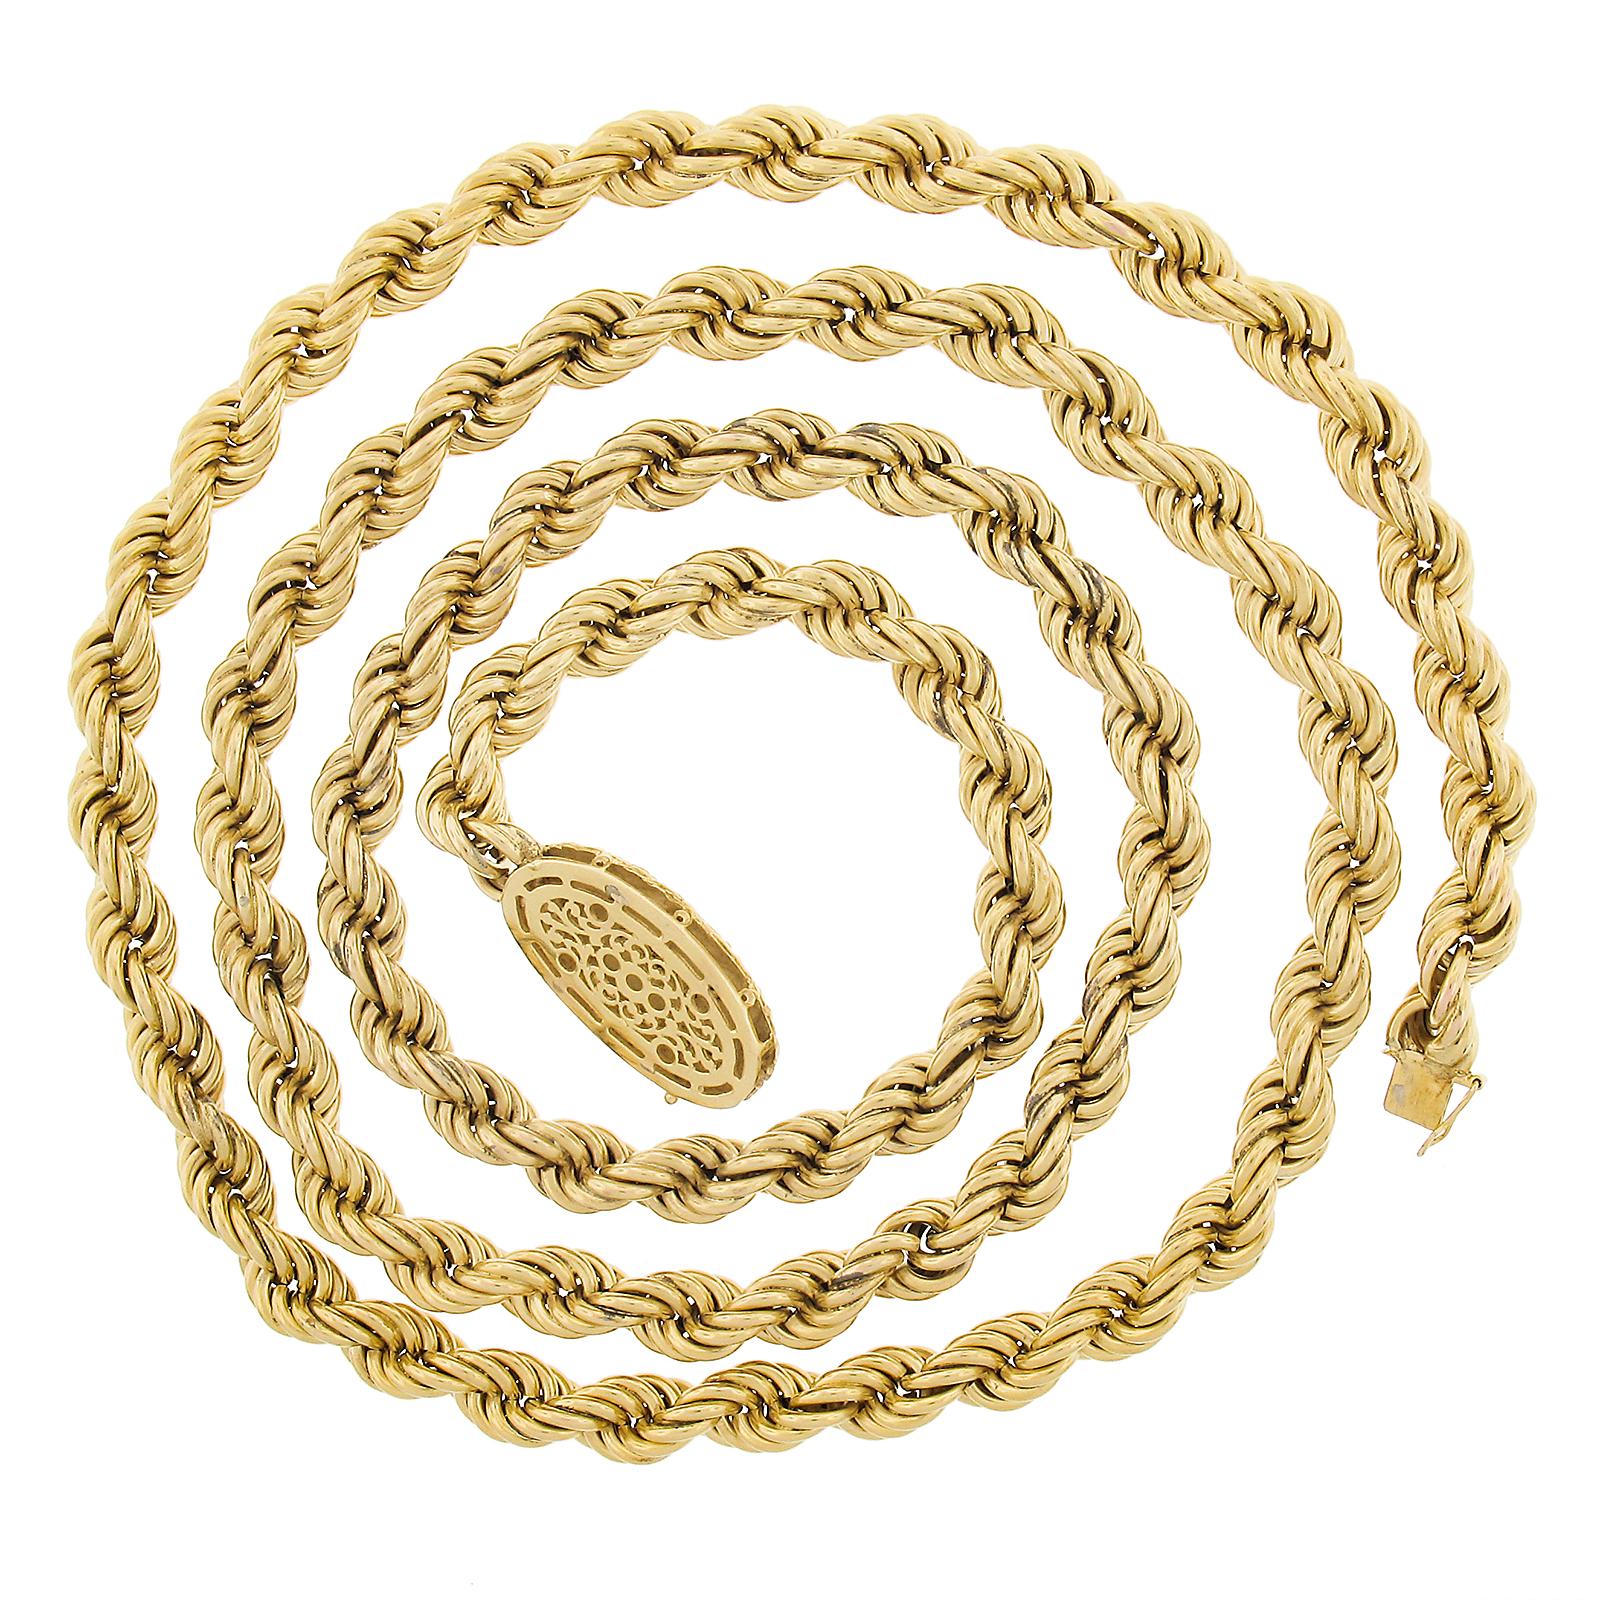 10mm rope chain 14k